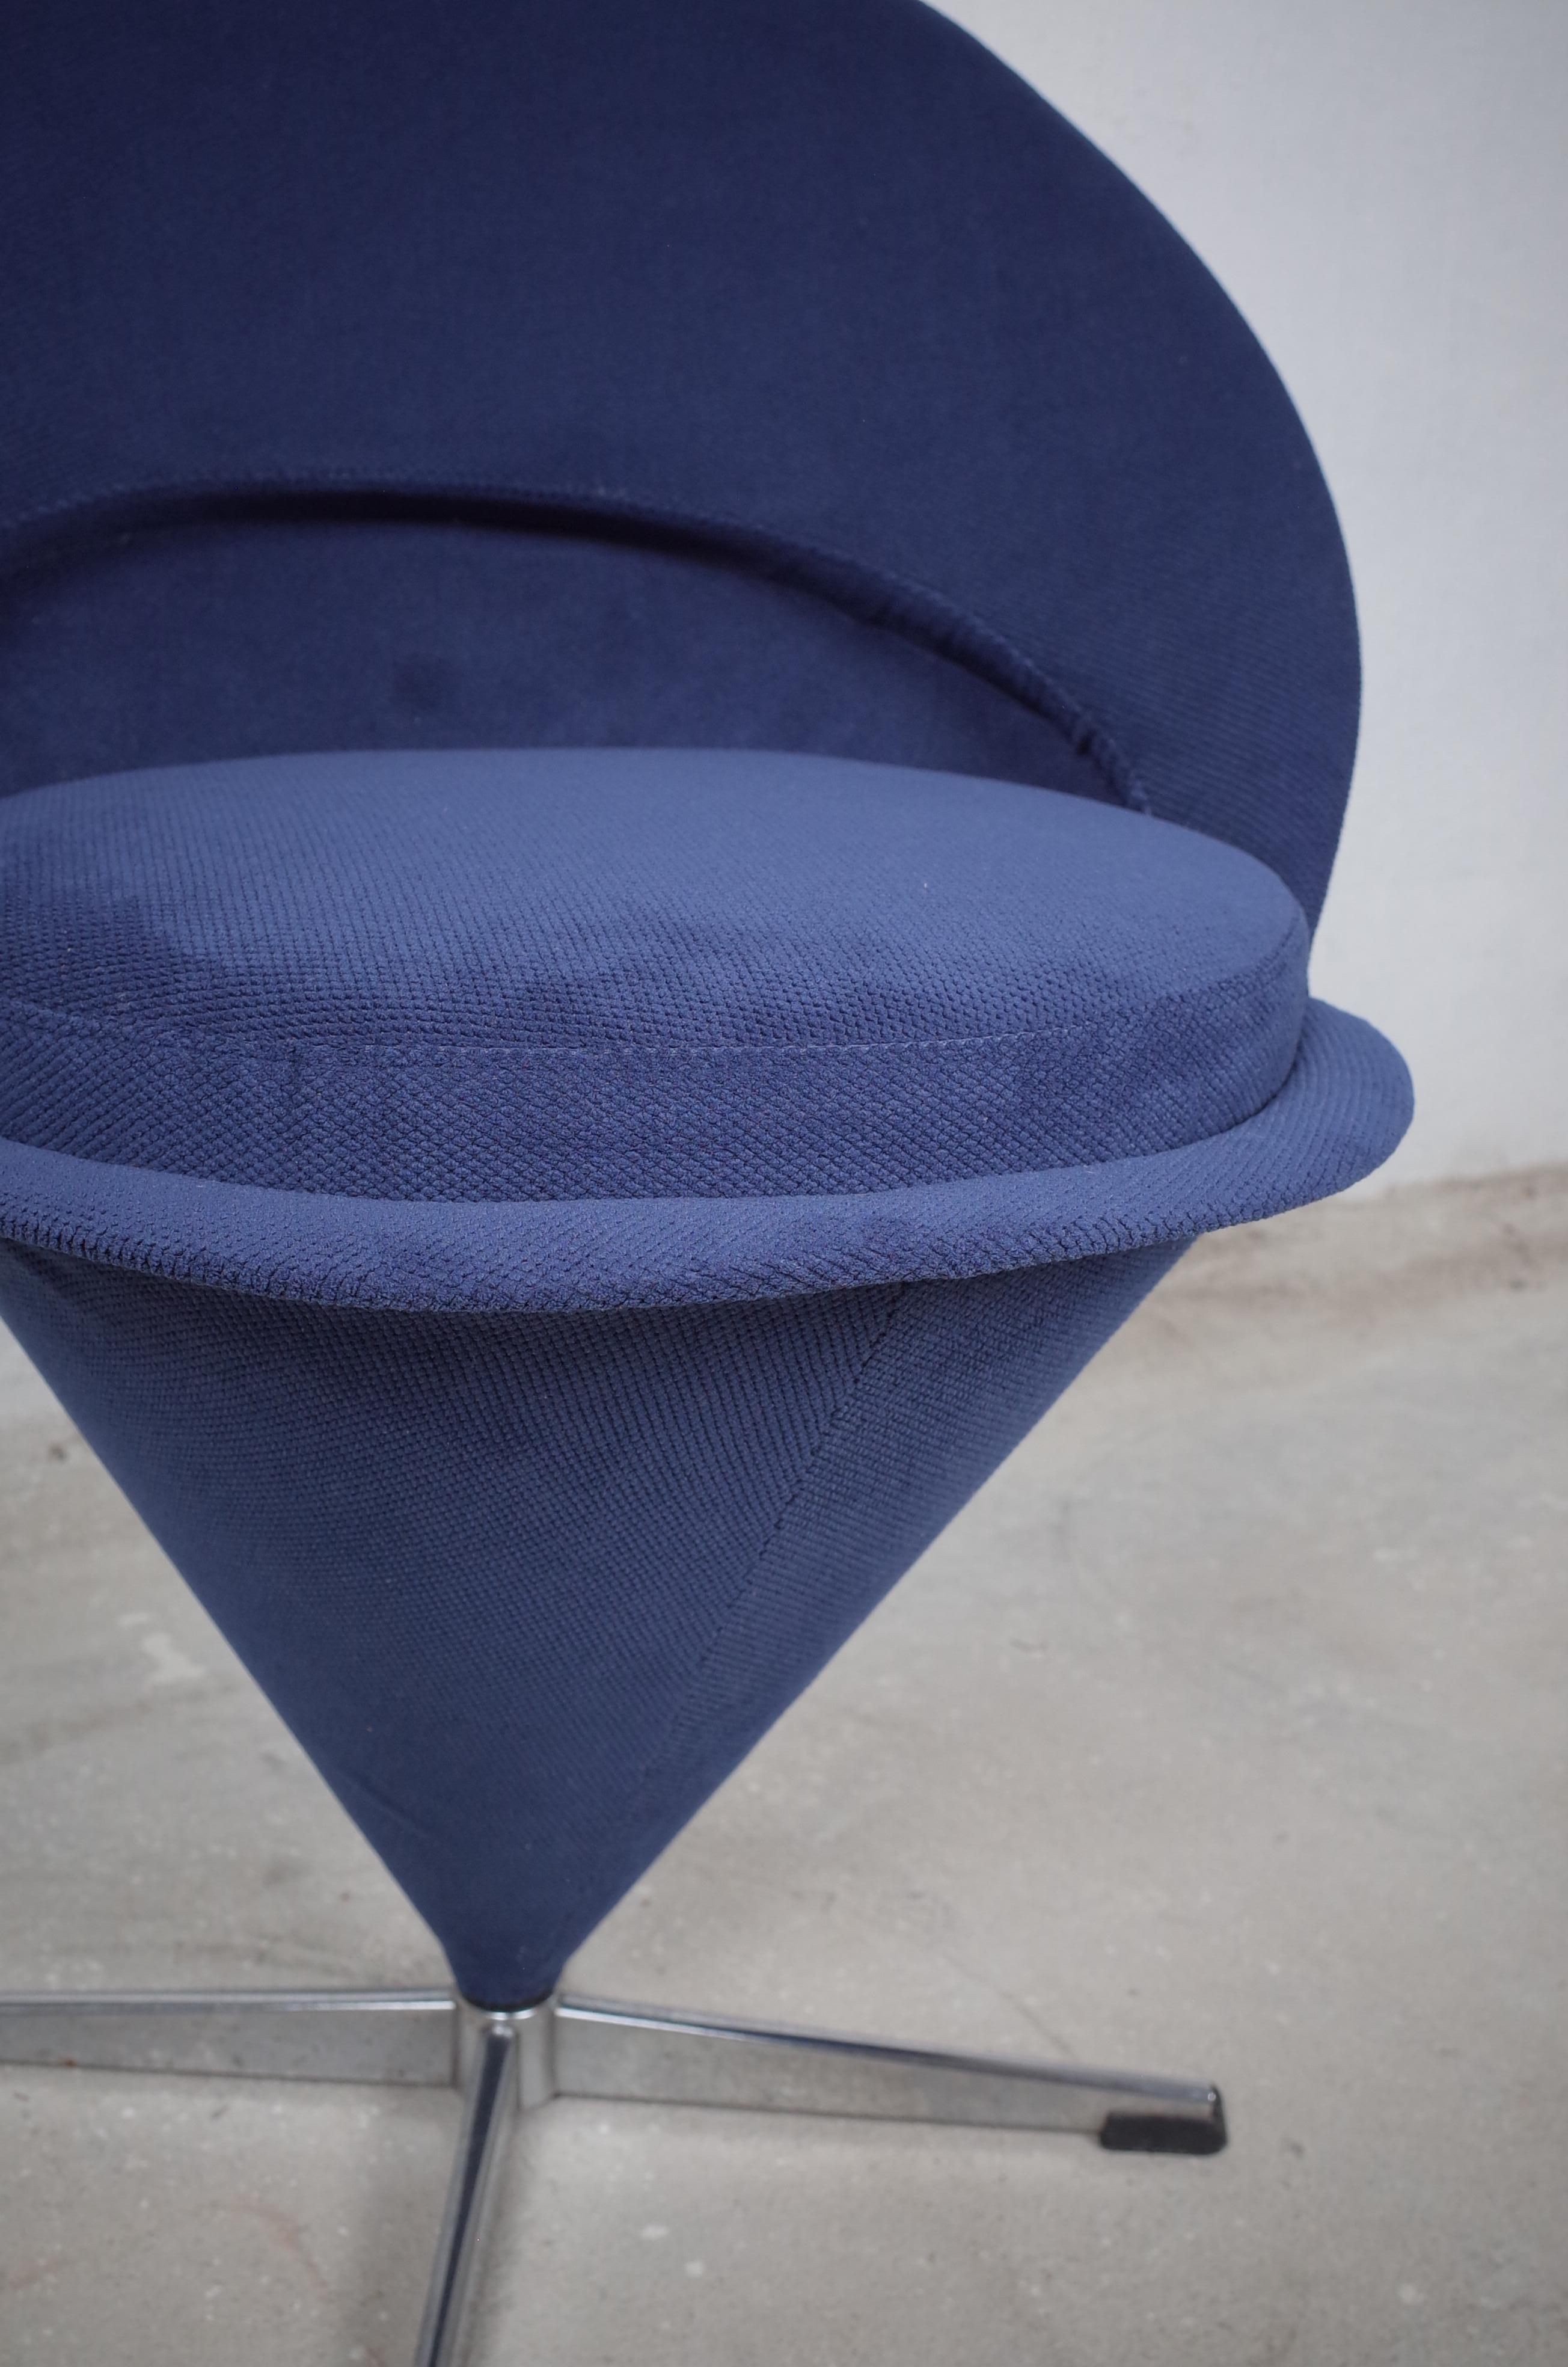 Midcentury Blue Cone Chair by Verner Panton, 1960s For Sale 2